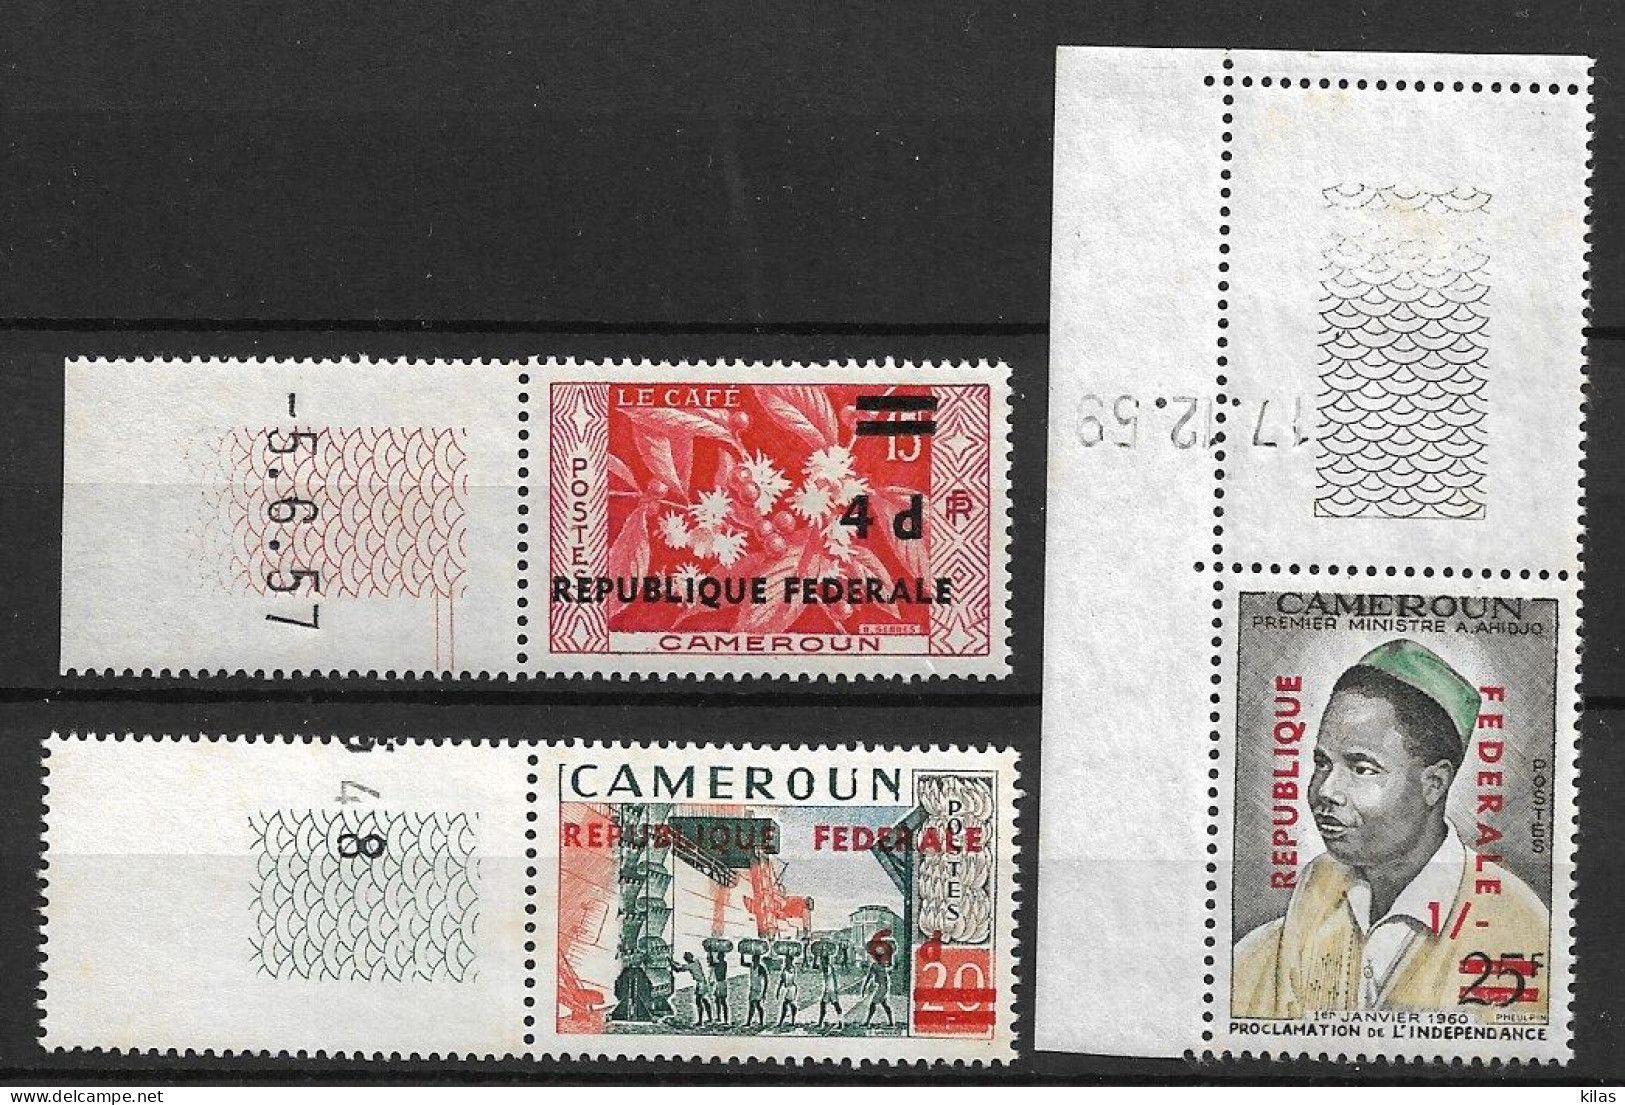 CAMEROON 1961  SURCHARGES MNH - Cameroun (1960-...)